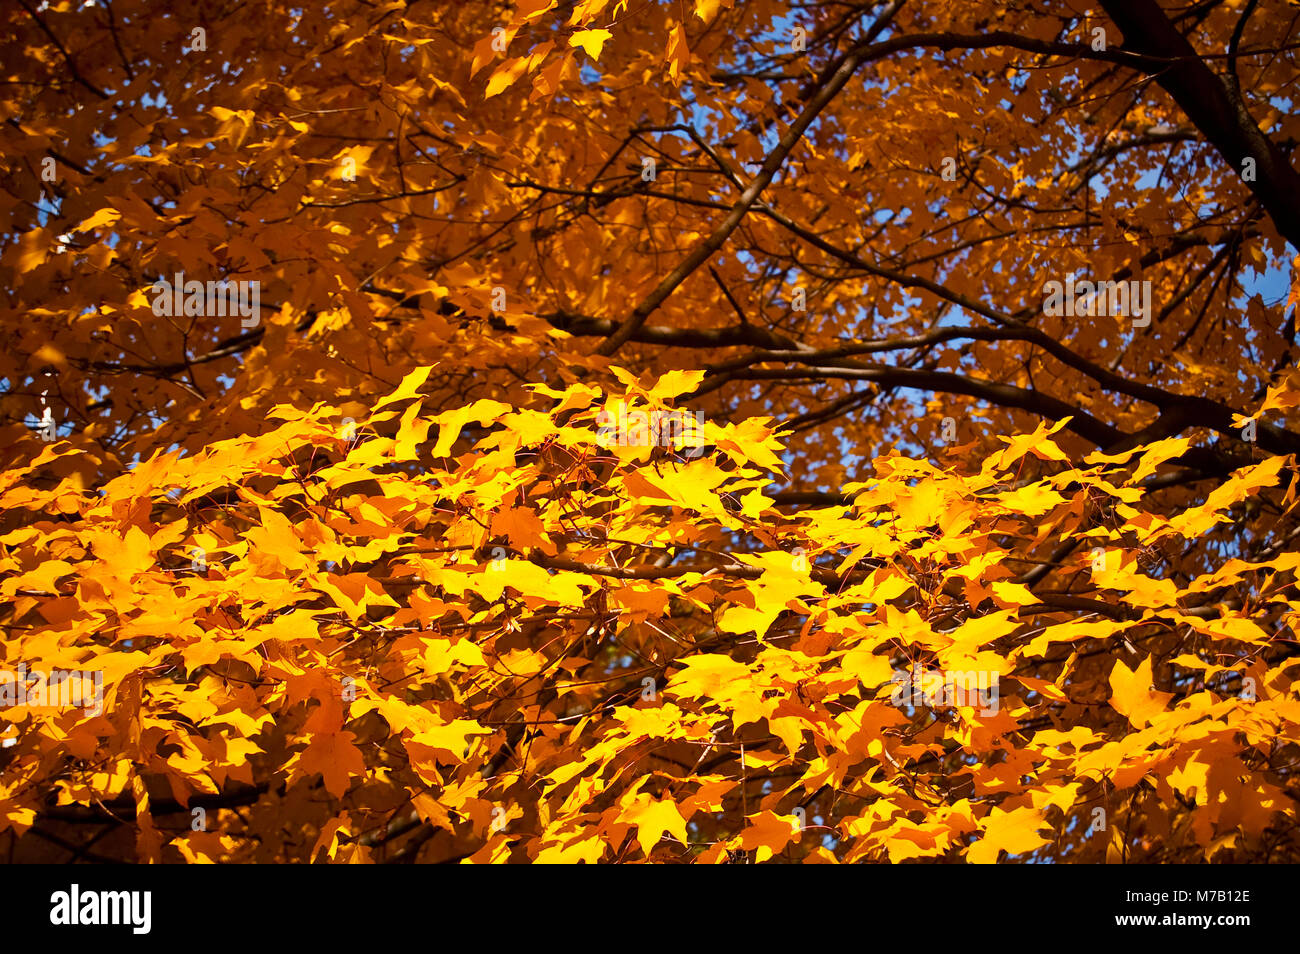 Maple leaves on a tree, Central Park, Manhattan, New York City, New York State, USA Stock Photo